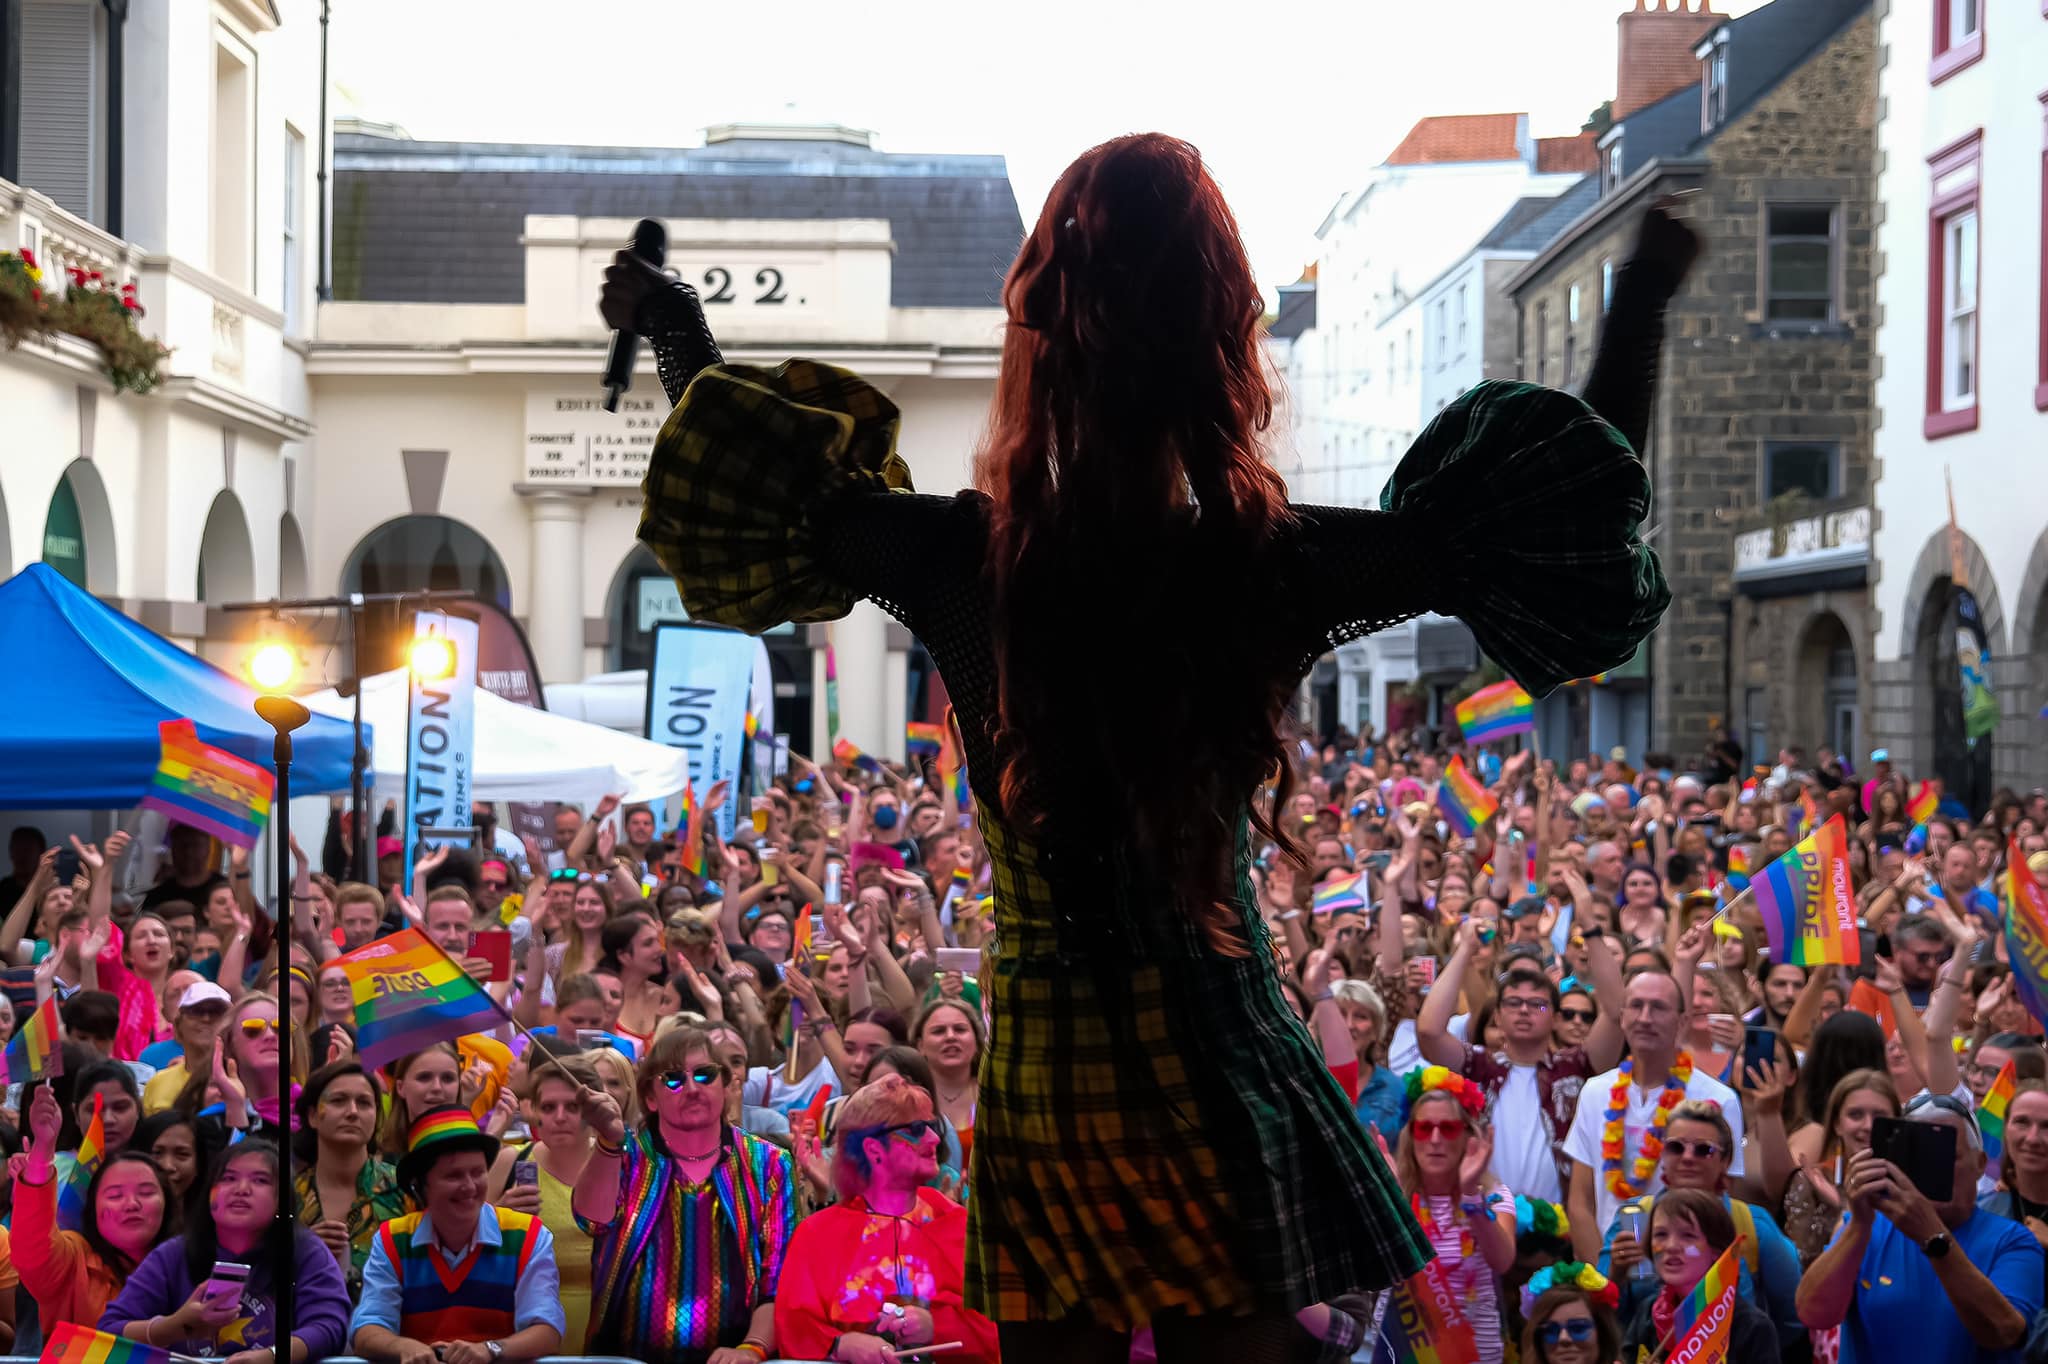 Crowds cheer for performer at the Channel Islands Pride celebrations